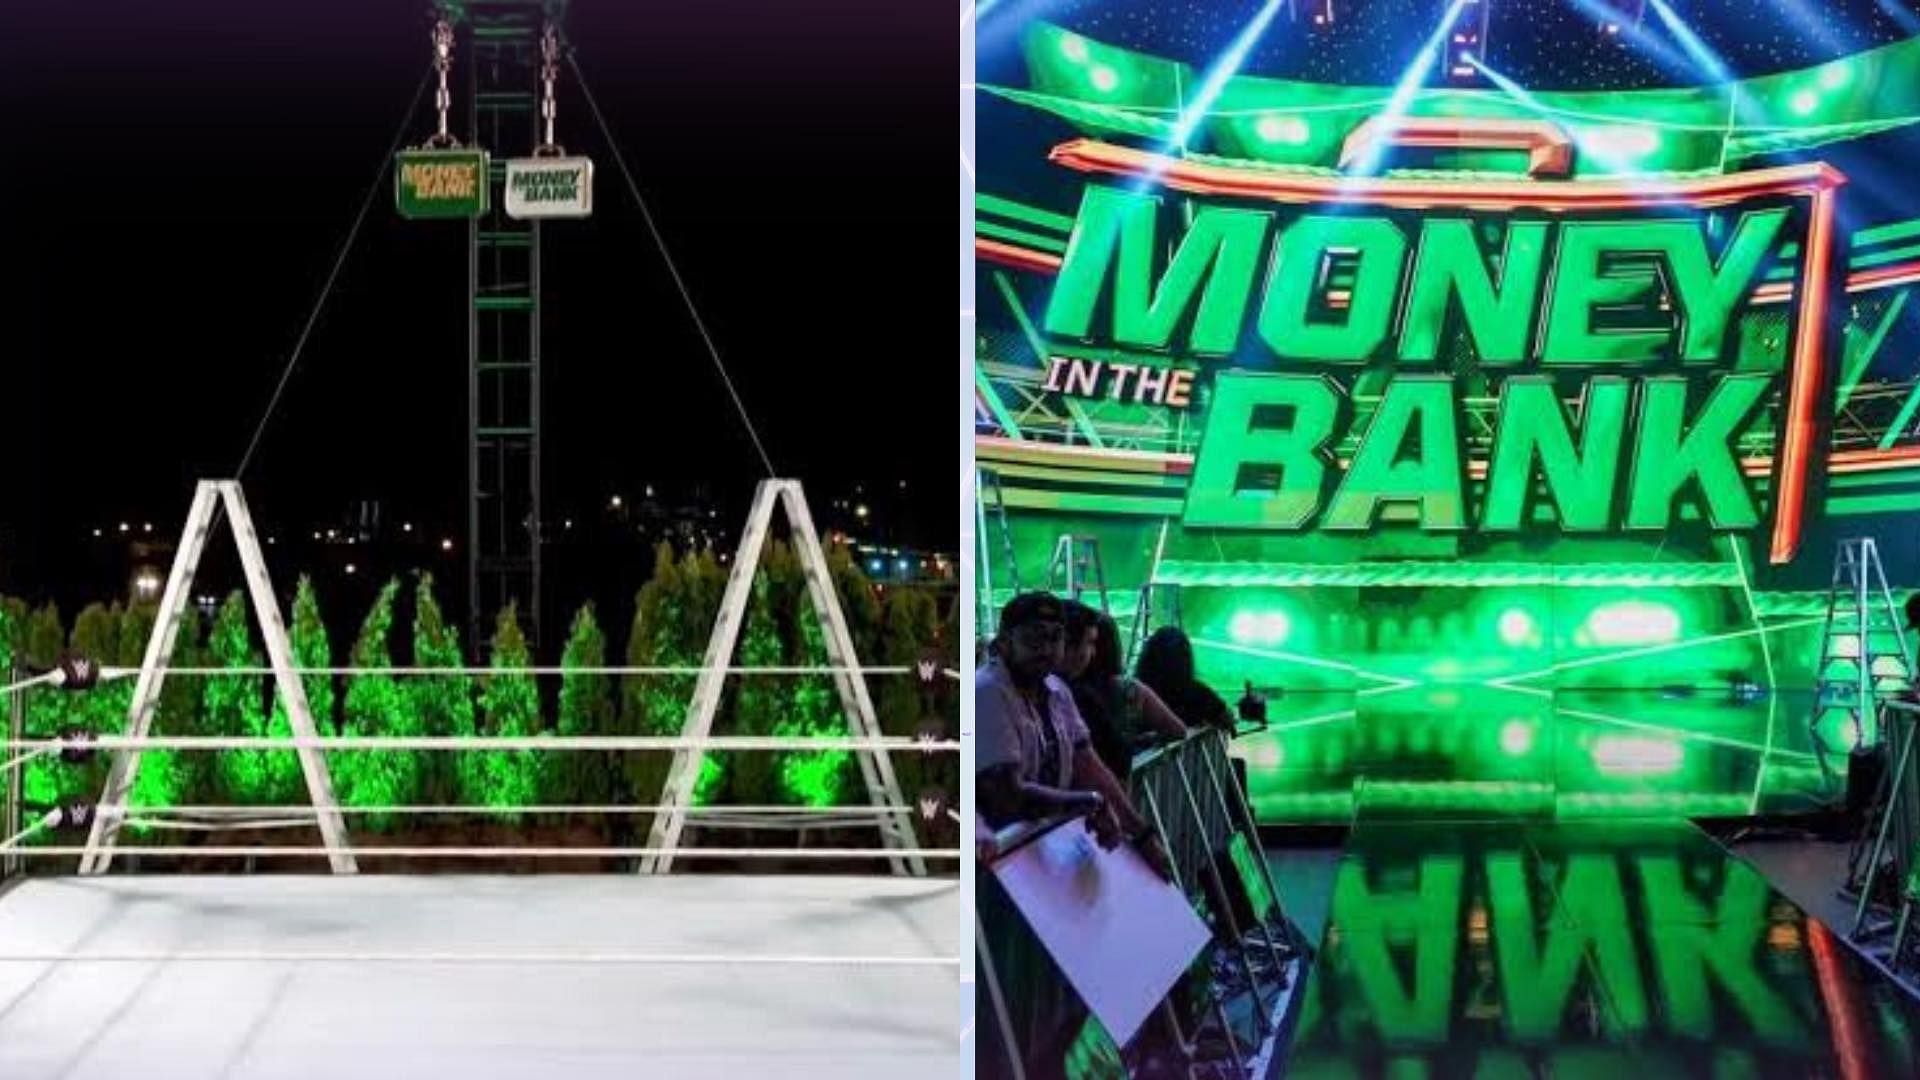 Money in the Bank is WWE